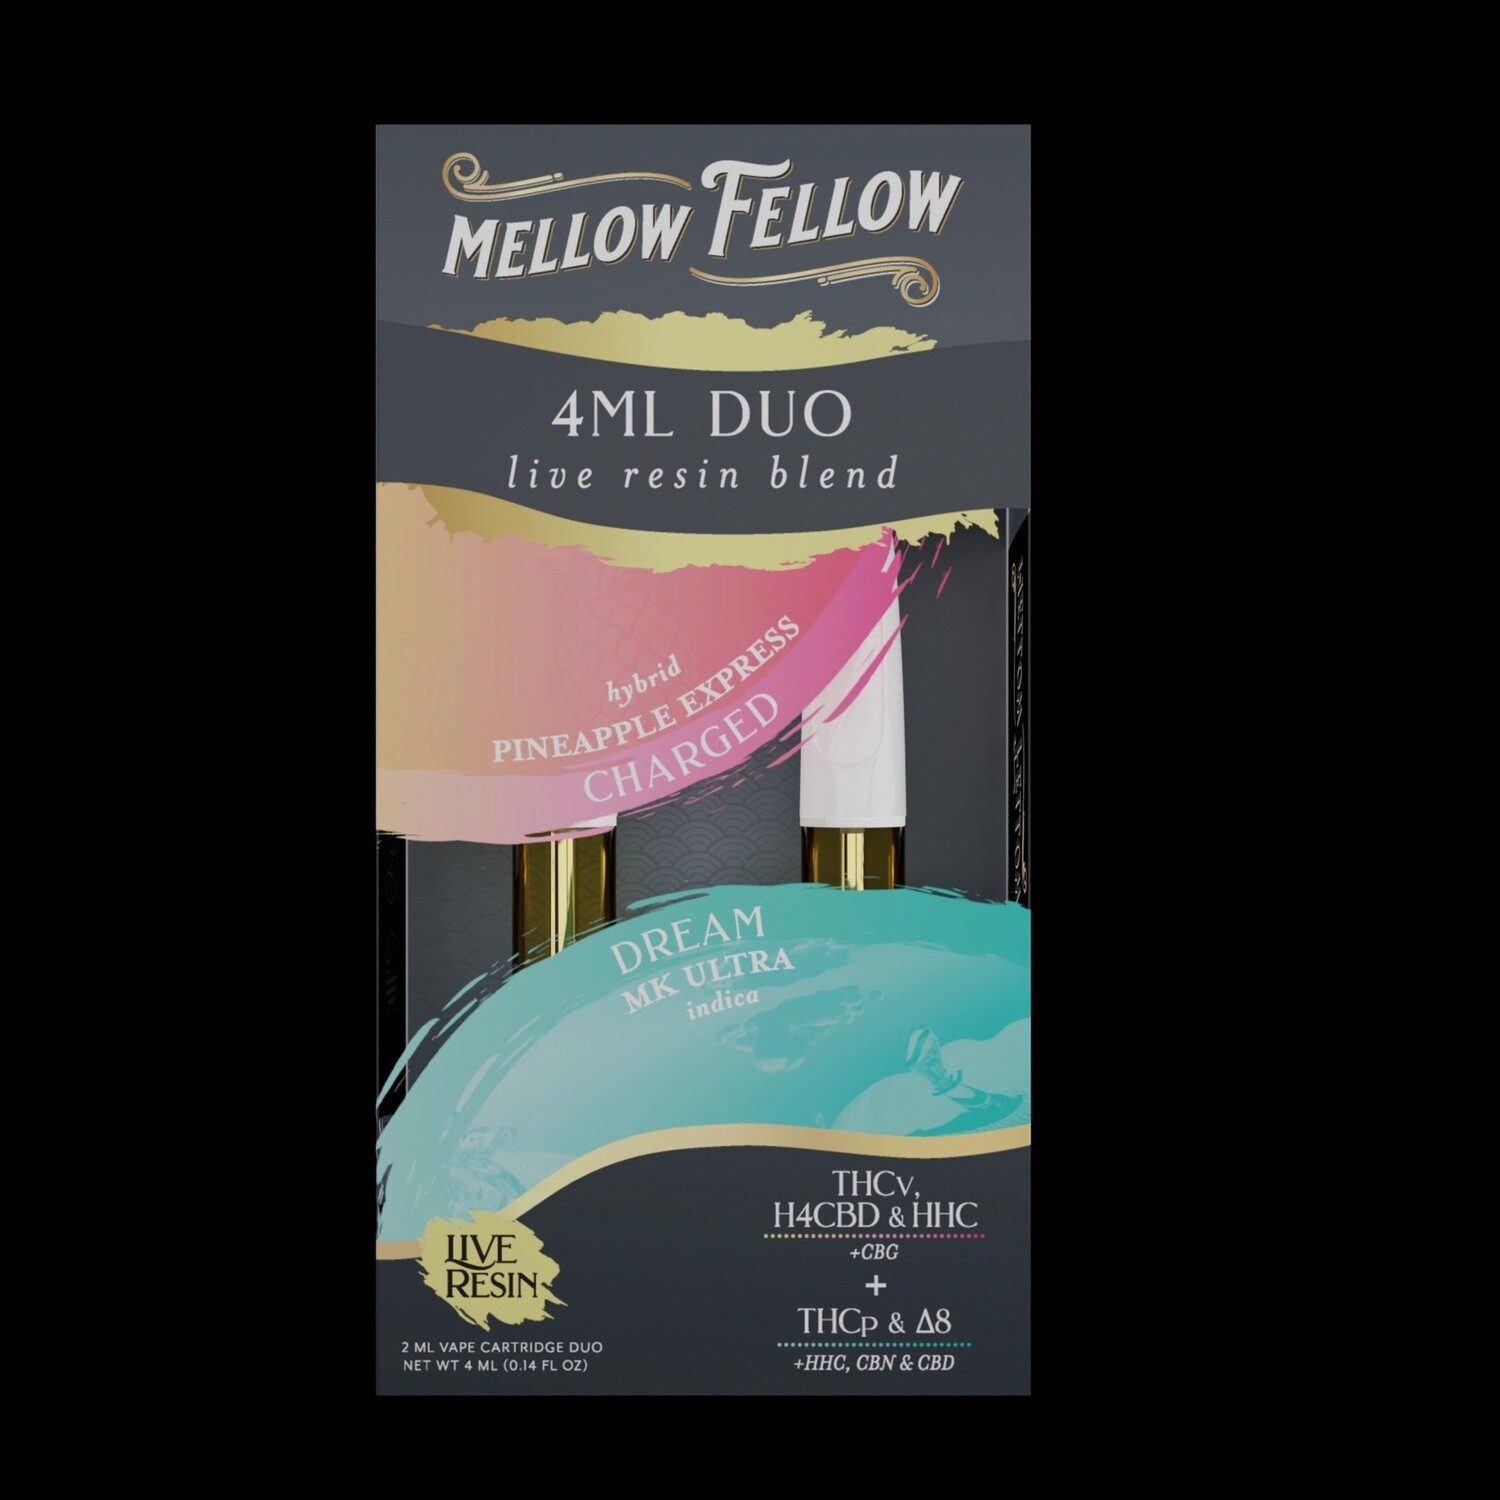 Mellow Fellow, 4ml Duo (2 x 2ml carts) - Charged, Dream